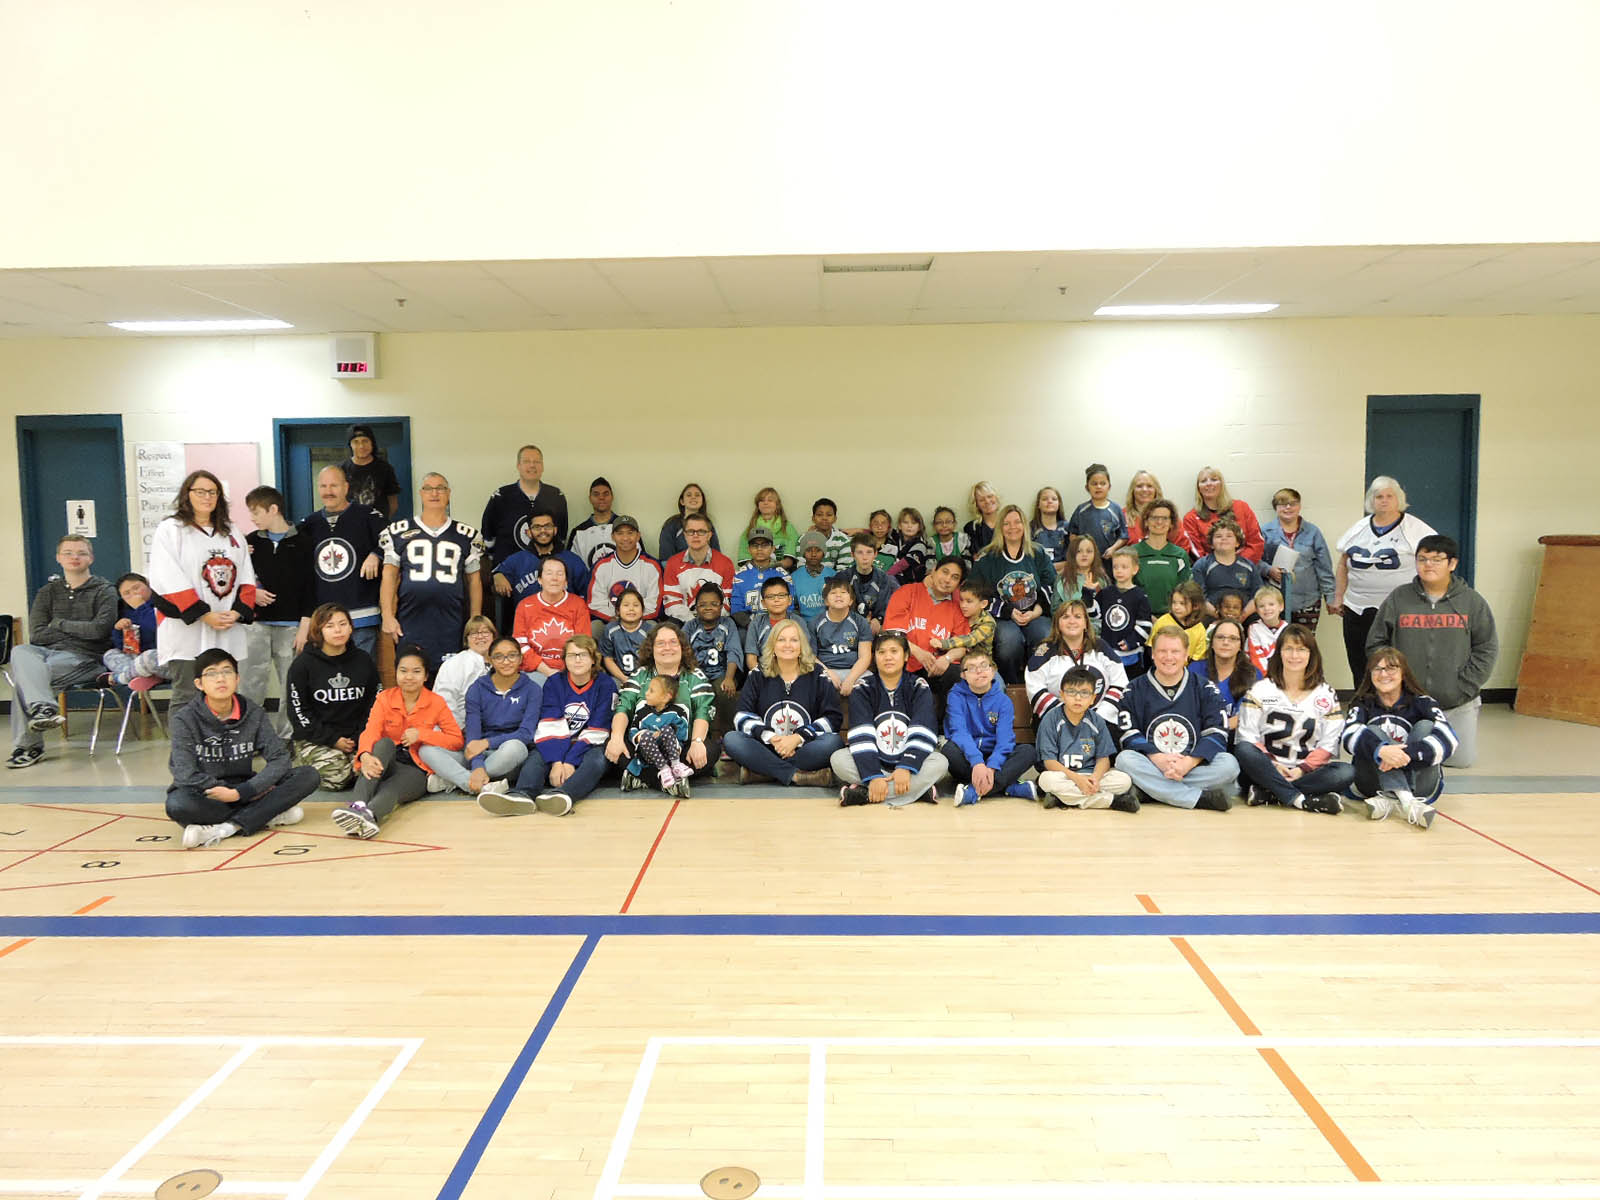 staff and students in their favorite sports team's jerseys - bombers, jets, team canada, blue jays, moose